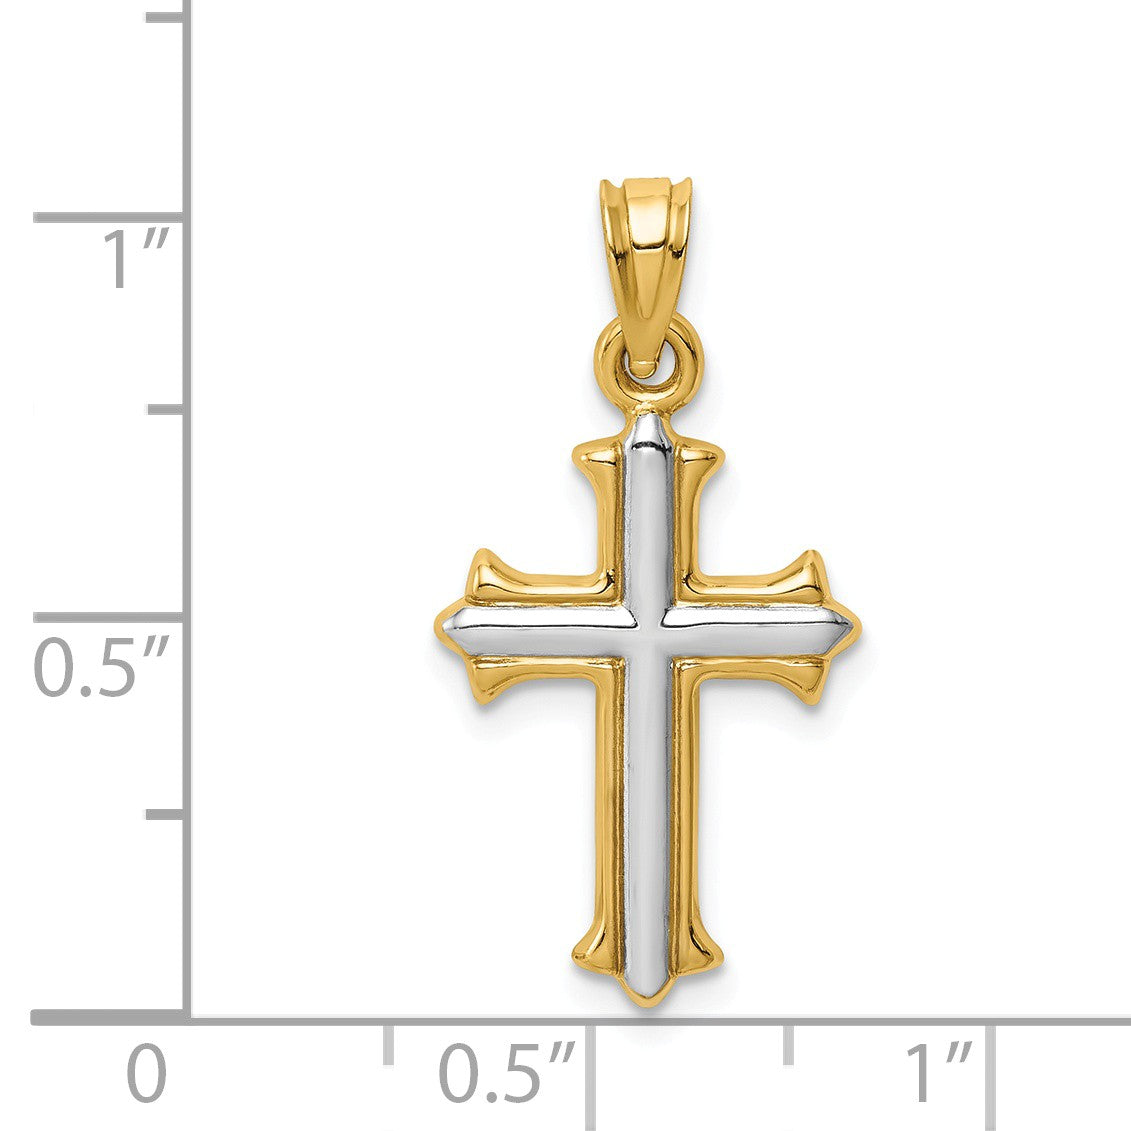 Alternate view of the 14k Yellow Gold and White Rhodium Hollow Fleur de Lis Cross Pendant by The Black Bow Jewelry Co.